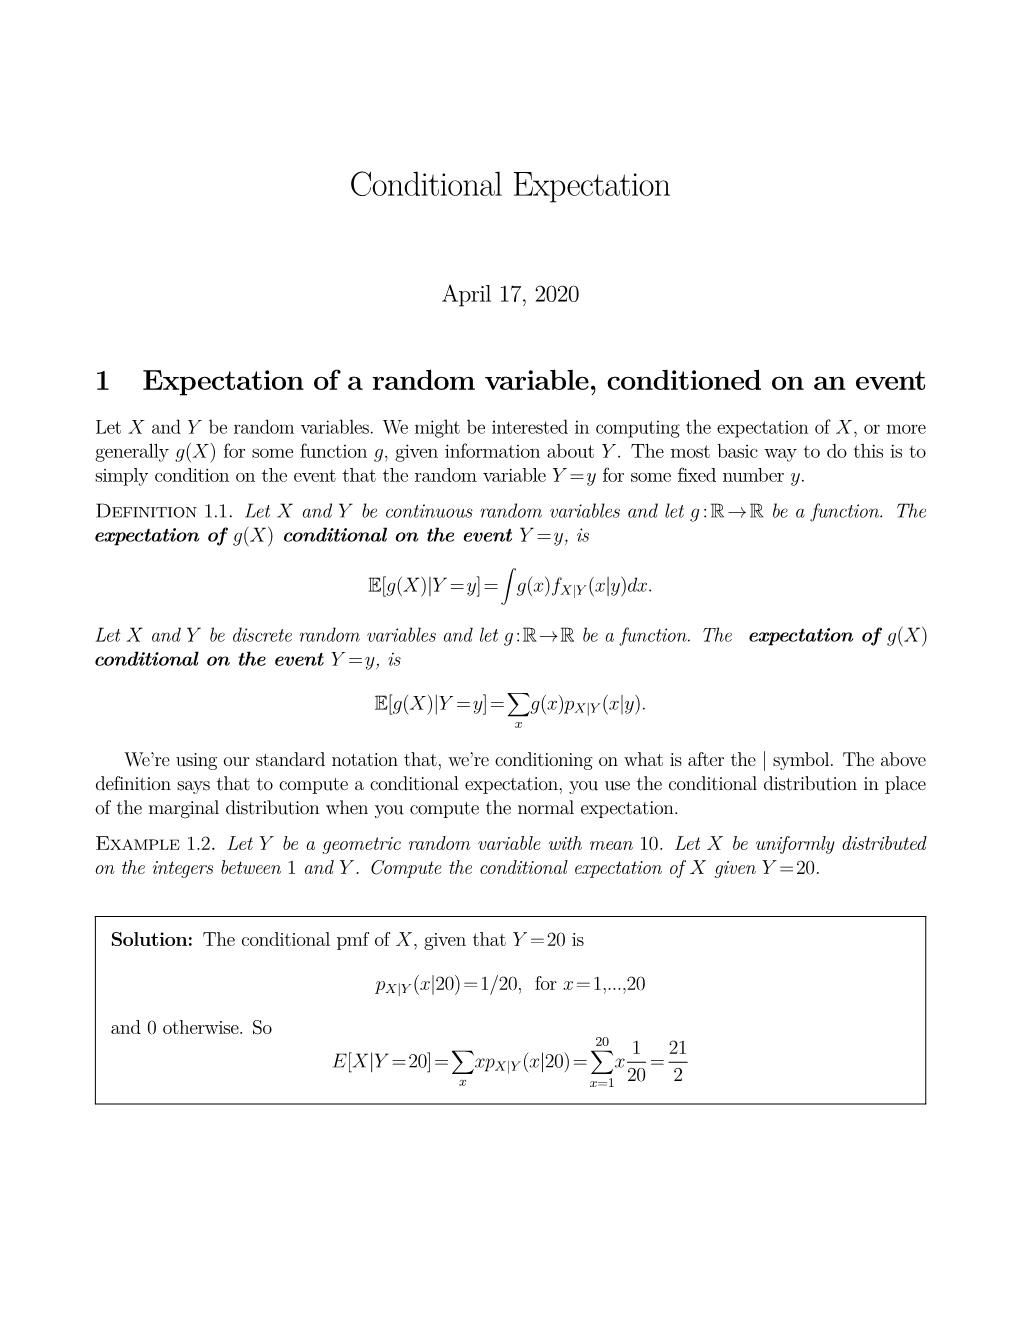 Conditional Expectation